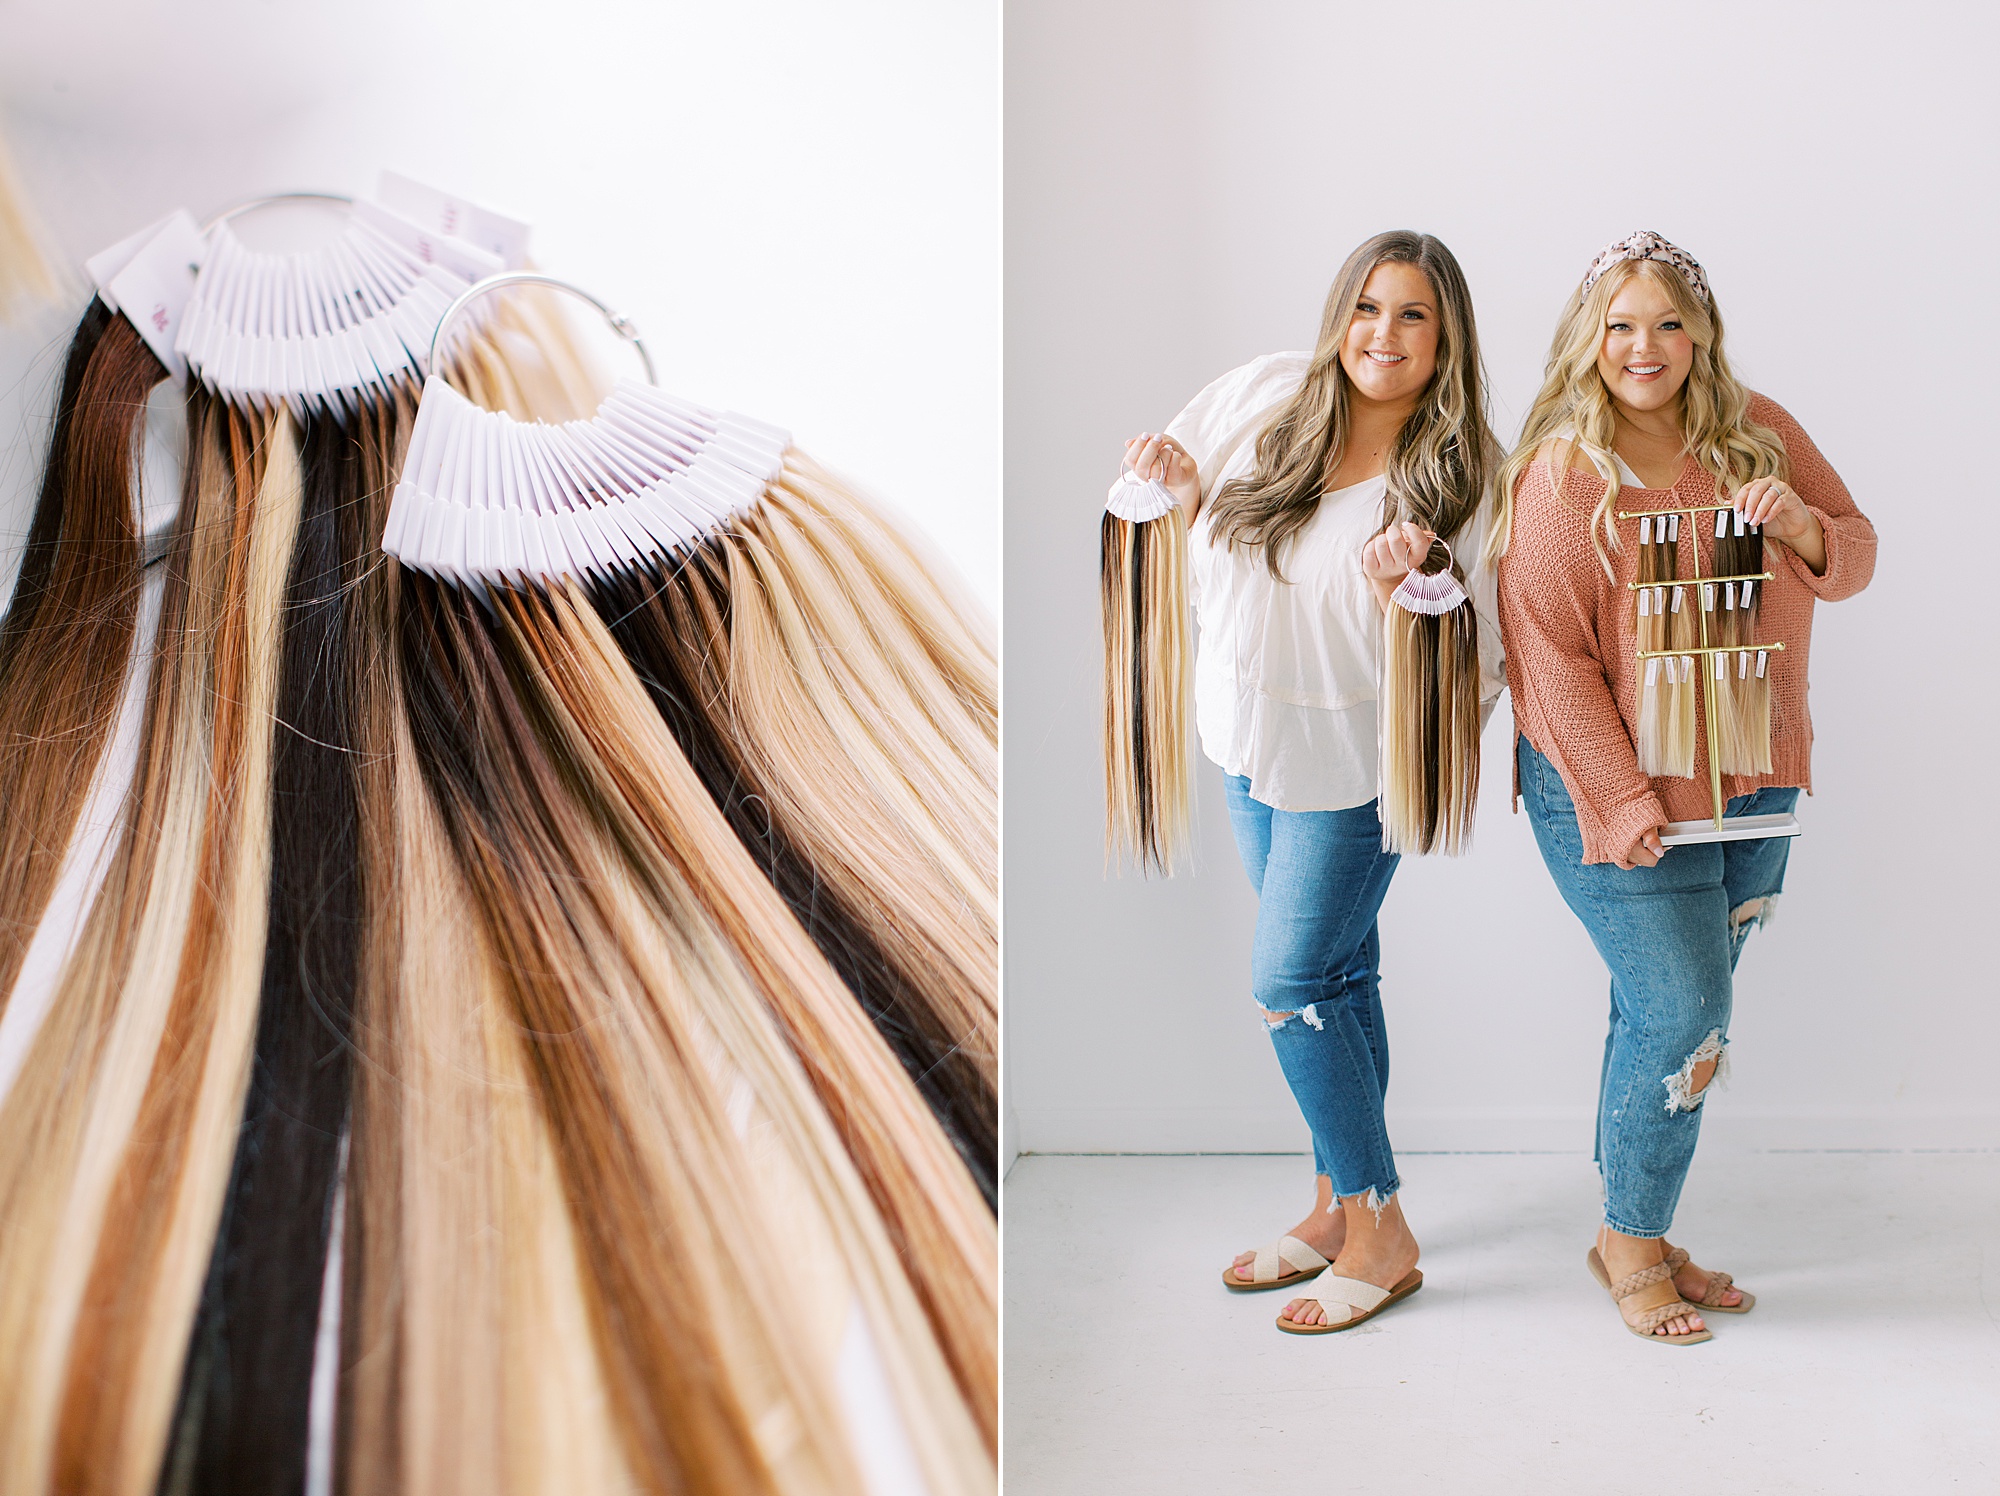 women hold hair extensions during branding photos in Charlotte studio